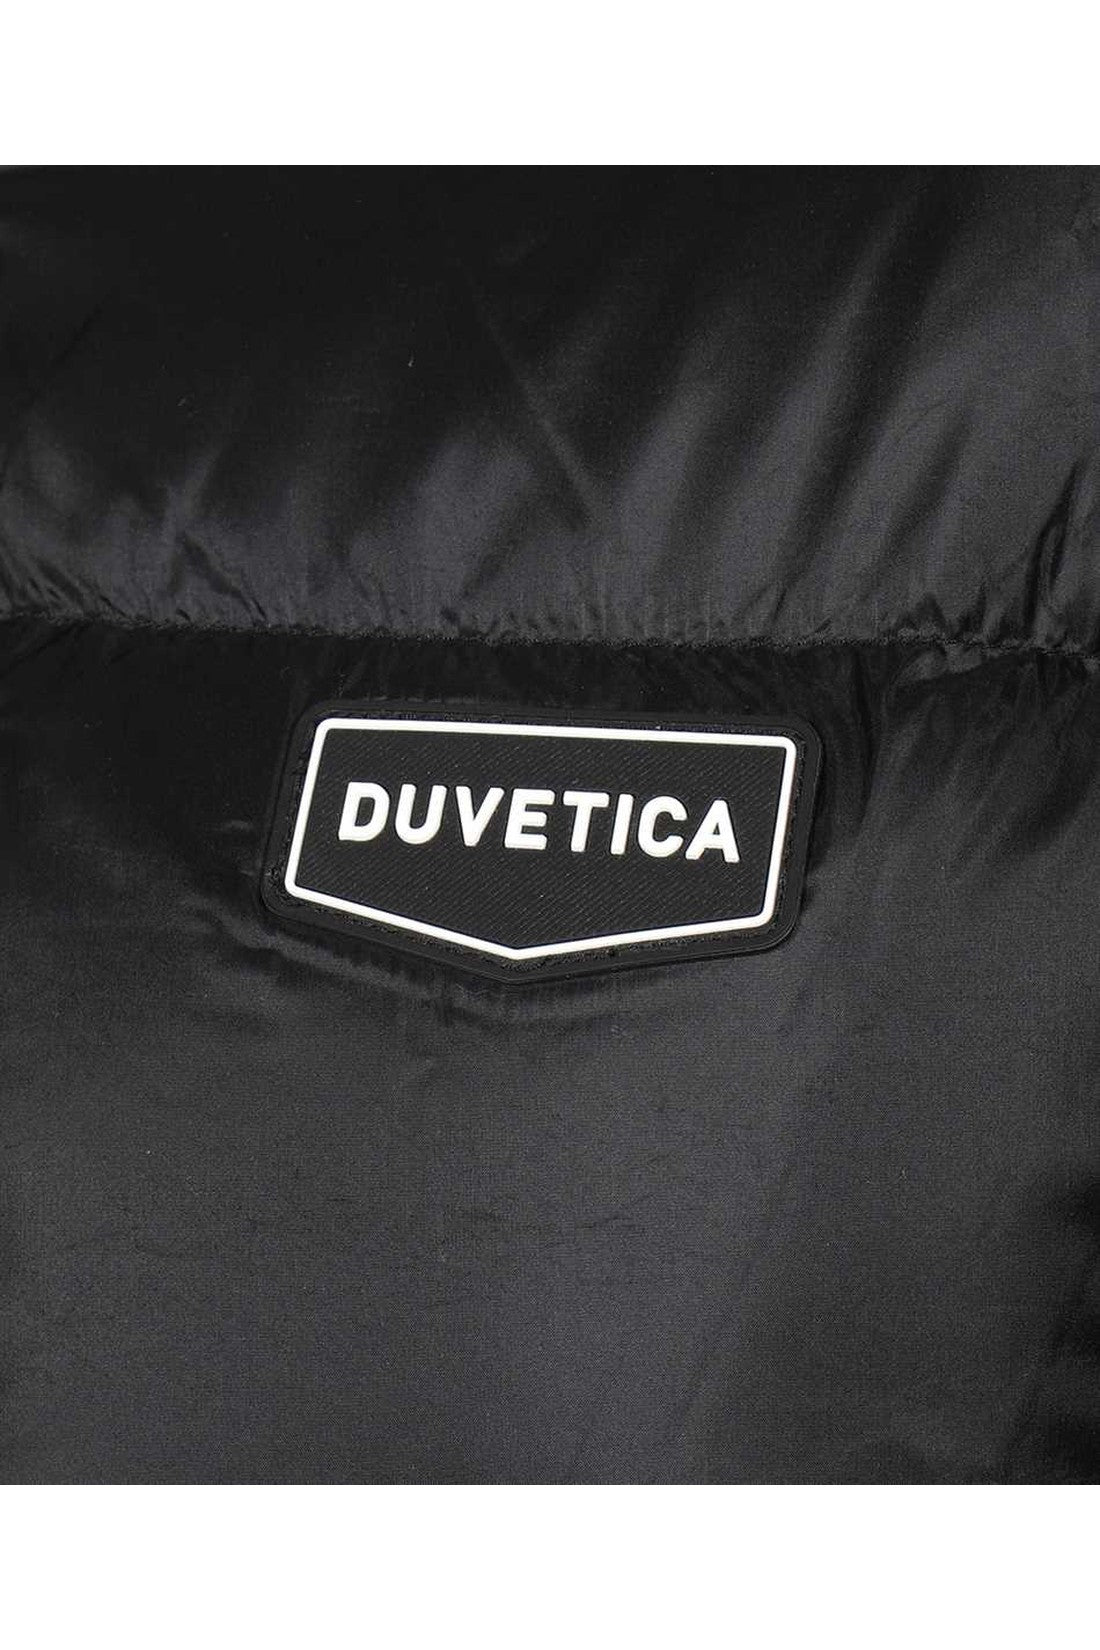 Duvetica-OUTLET-SALE-Hooded-full-zip-down-jacket-Jacken-Mantel-ARCHIVE-COLLECTION-3.jpg